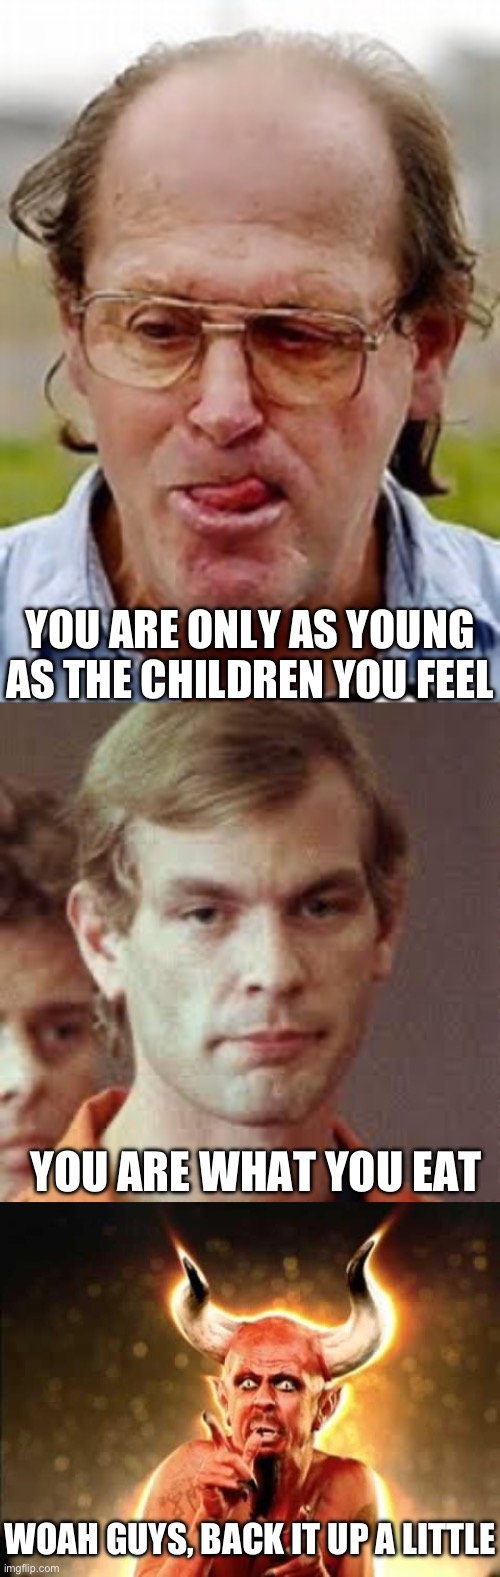 Scared devil | YOU ARE ONLY AS YOUNG AS THE CHILDREN YOU FEEL; YOU ARE WHAT YOU EAT; WOAH GUYS, BACK IT UP A LITTLE | image tagged in pedophile,jeffrey dahmer,scared devil,pedo,cannibal | made w/ Imgflip meme maker